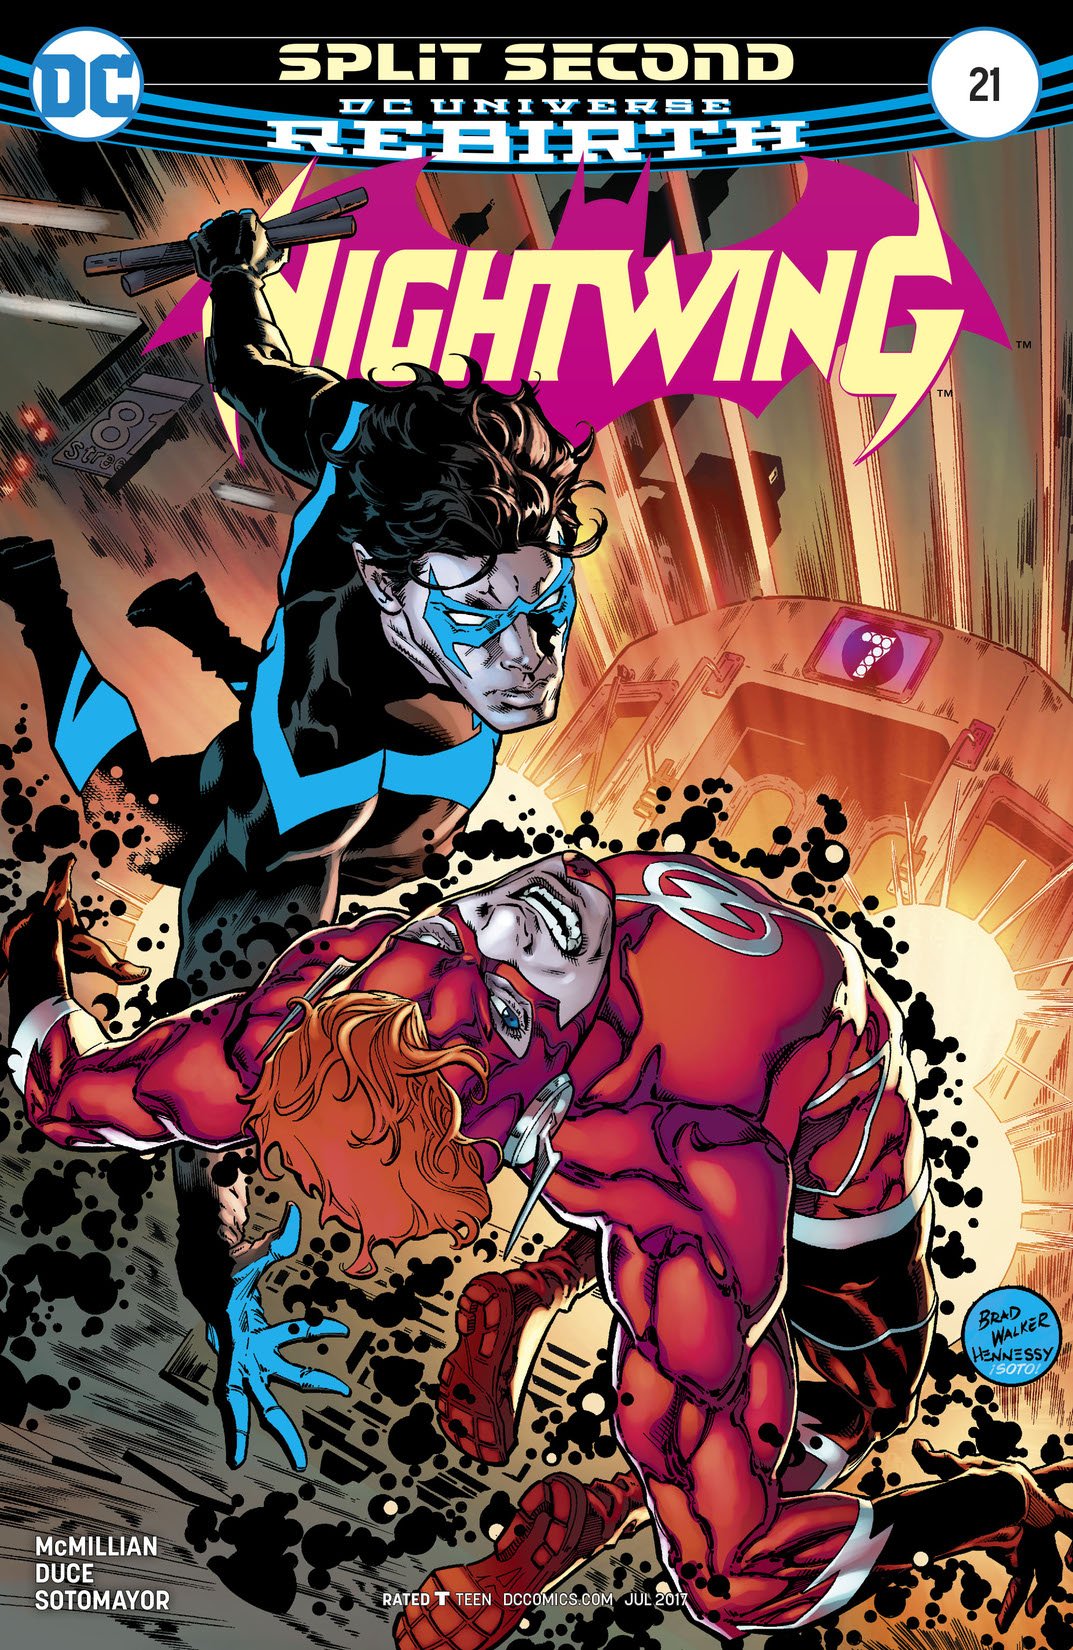 Nightwing (2016-) #21 preview images